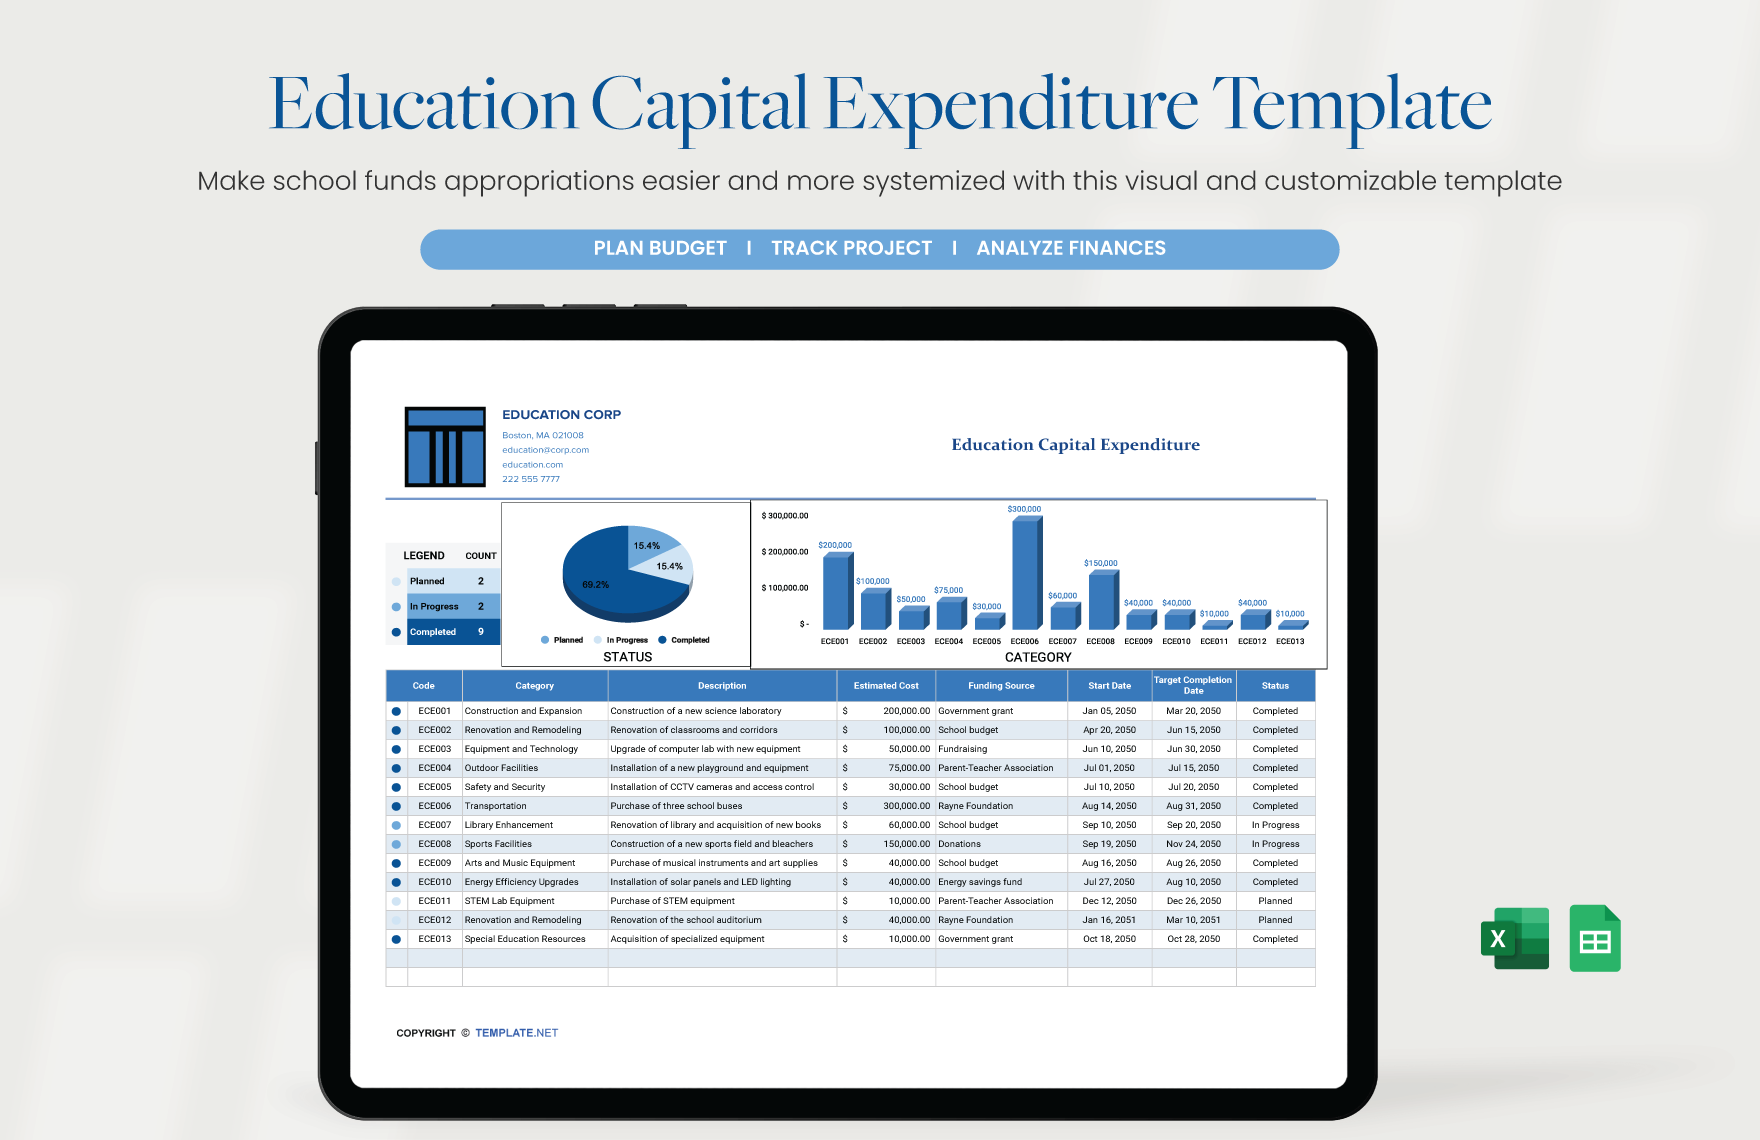 Education Capital Expenditure Template